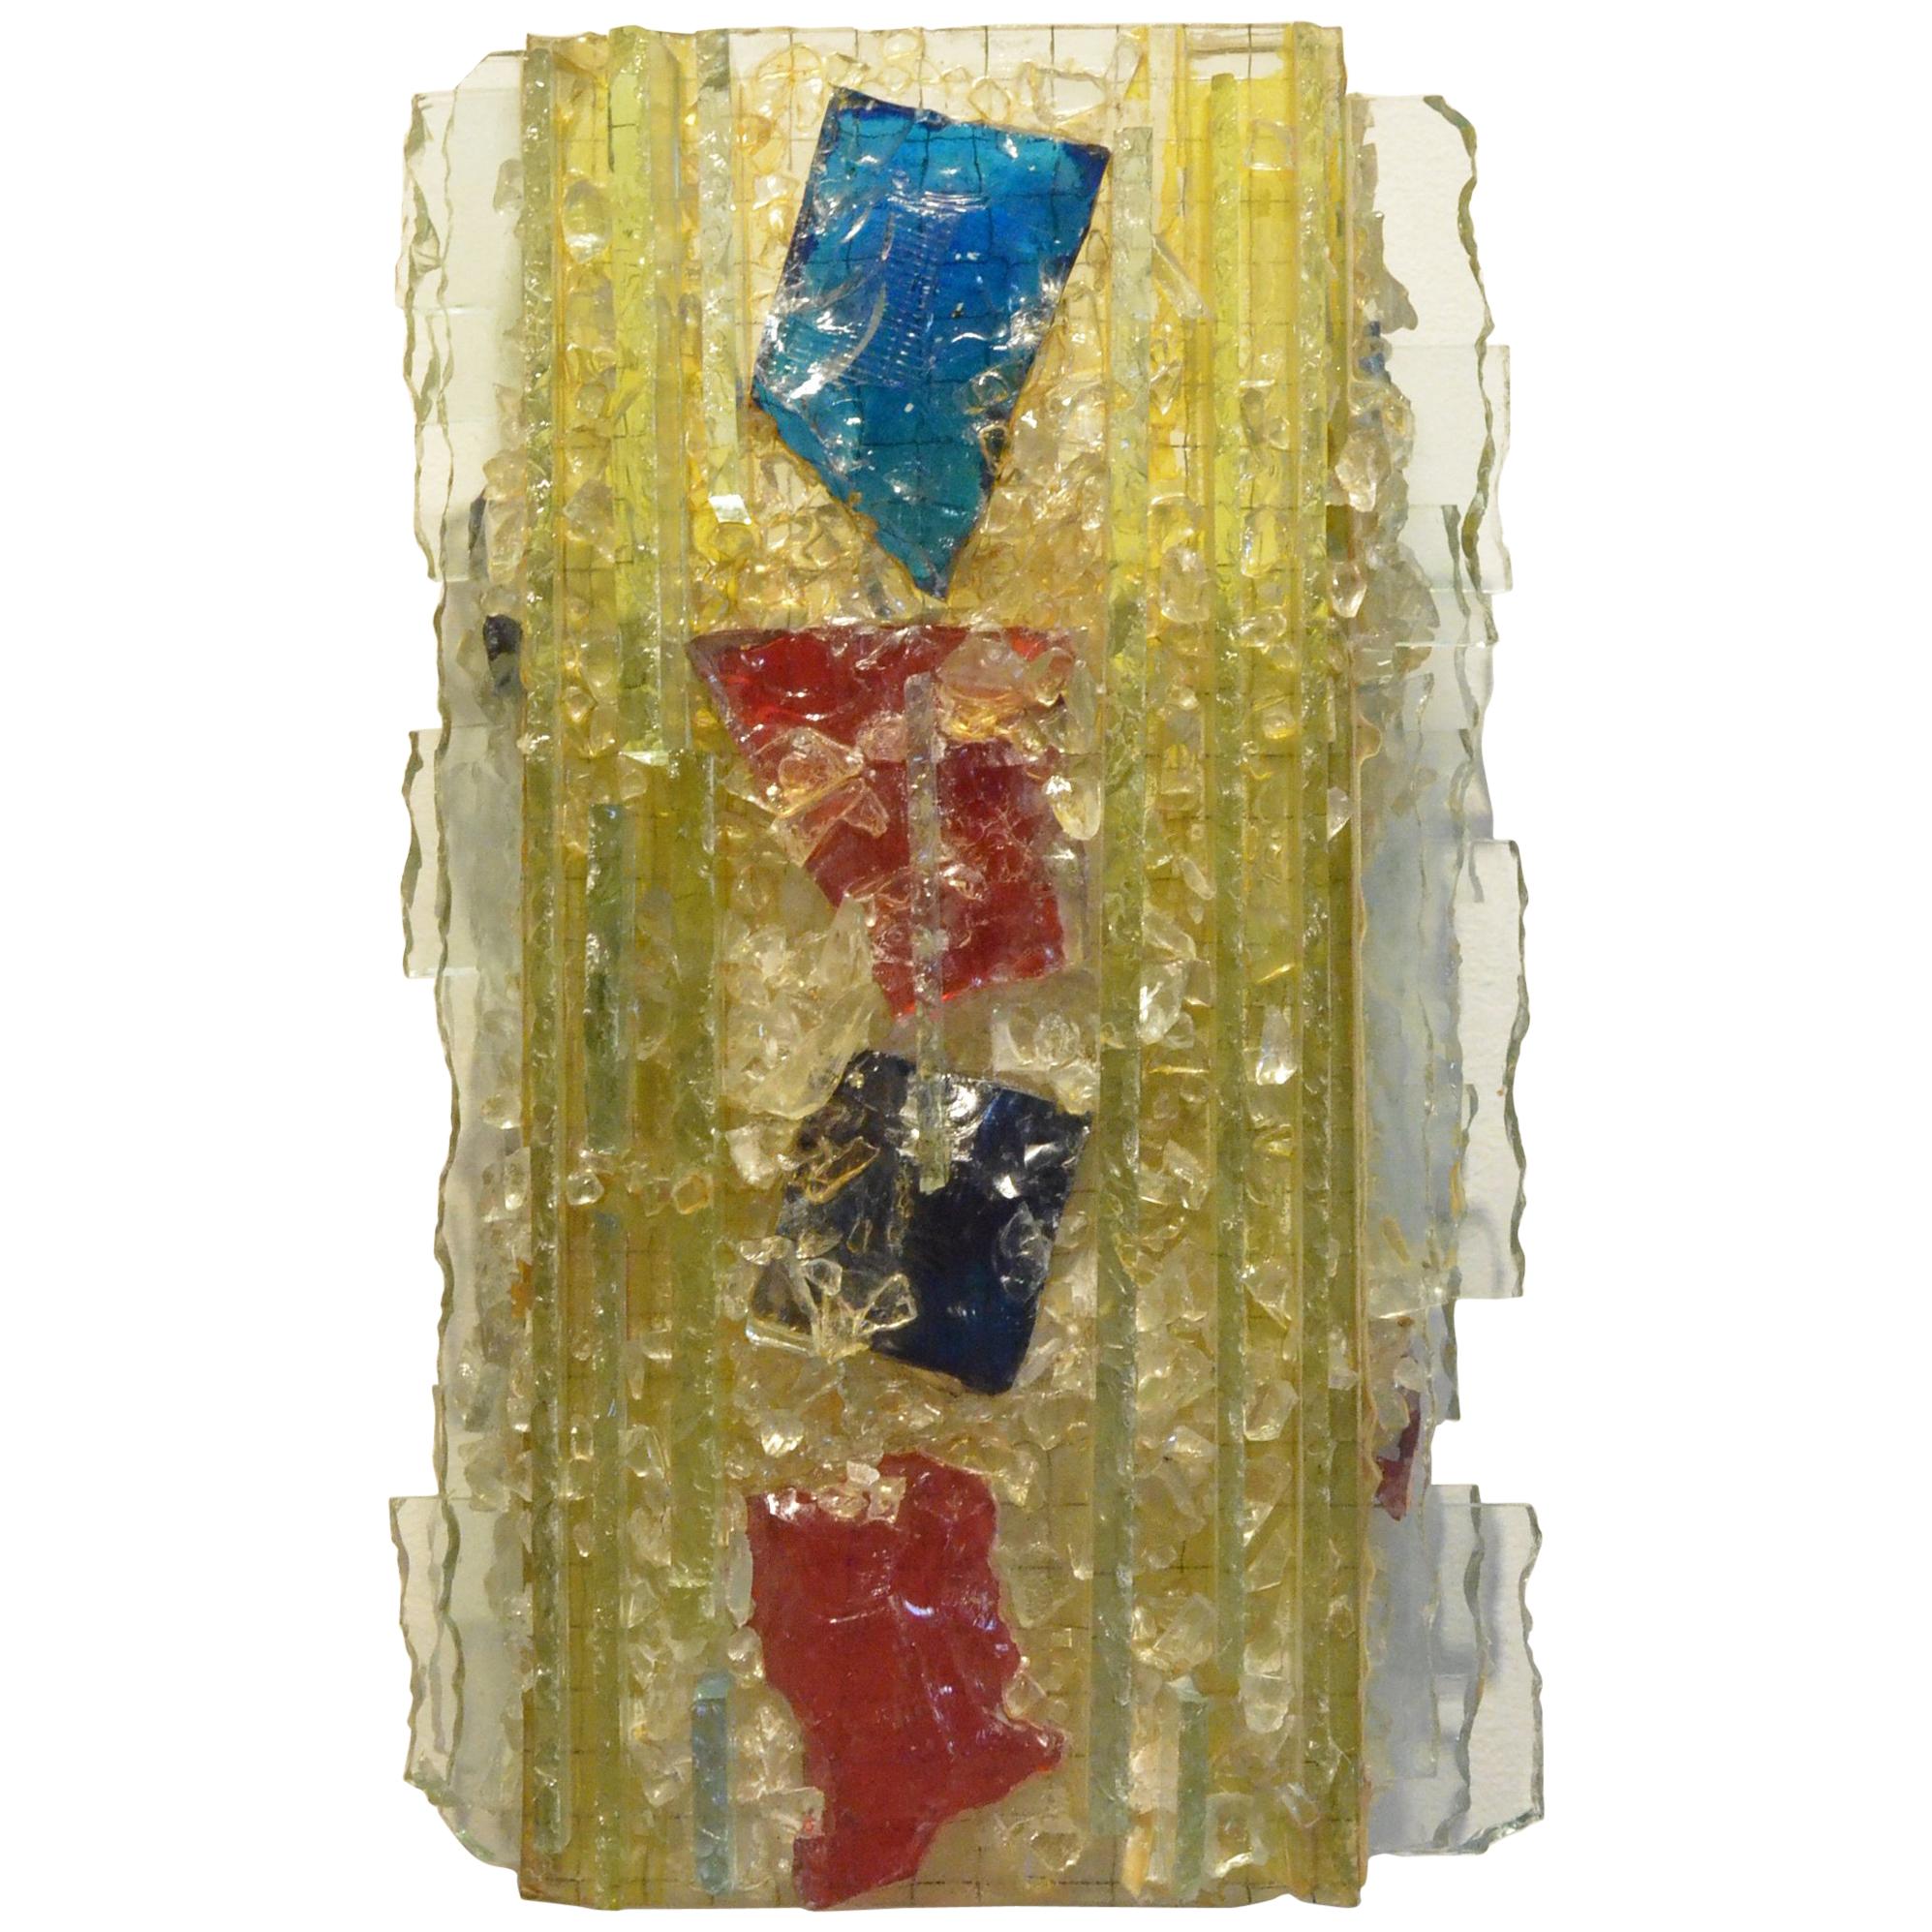 Midcentury Dutch Chartres Multicolored Glass Wall Sconce from Raak Amsterdam For Sale